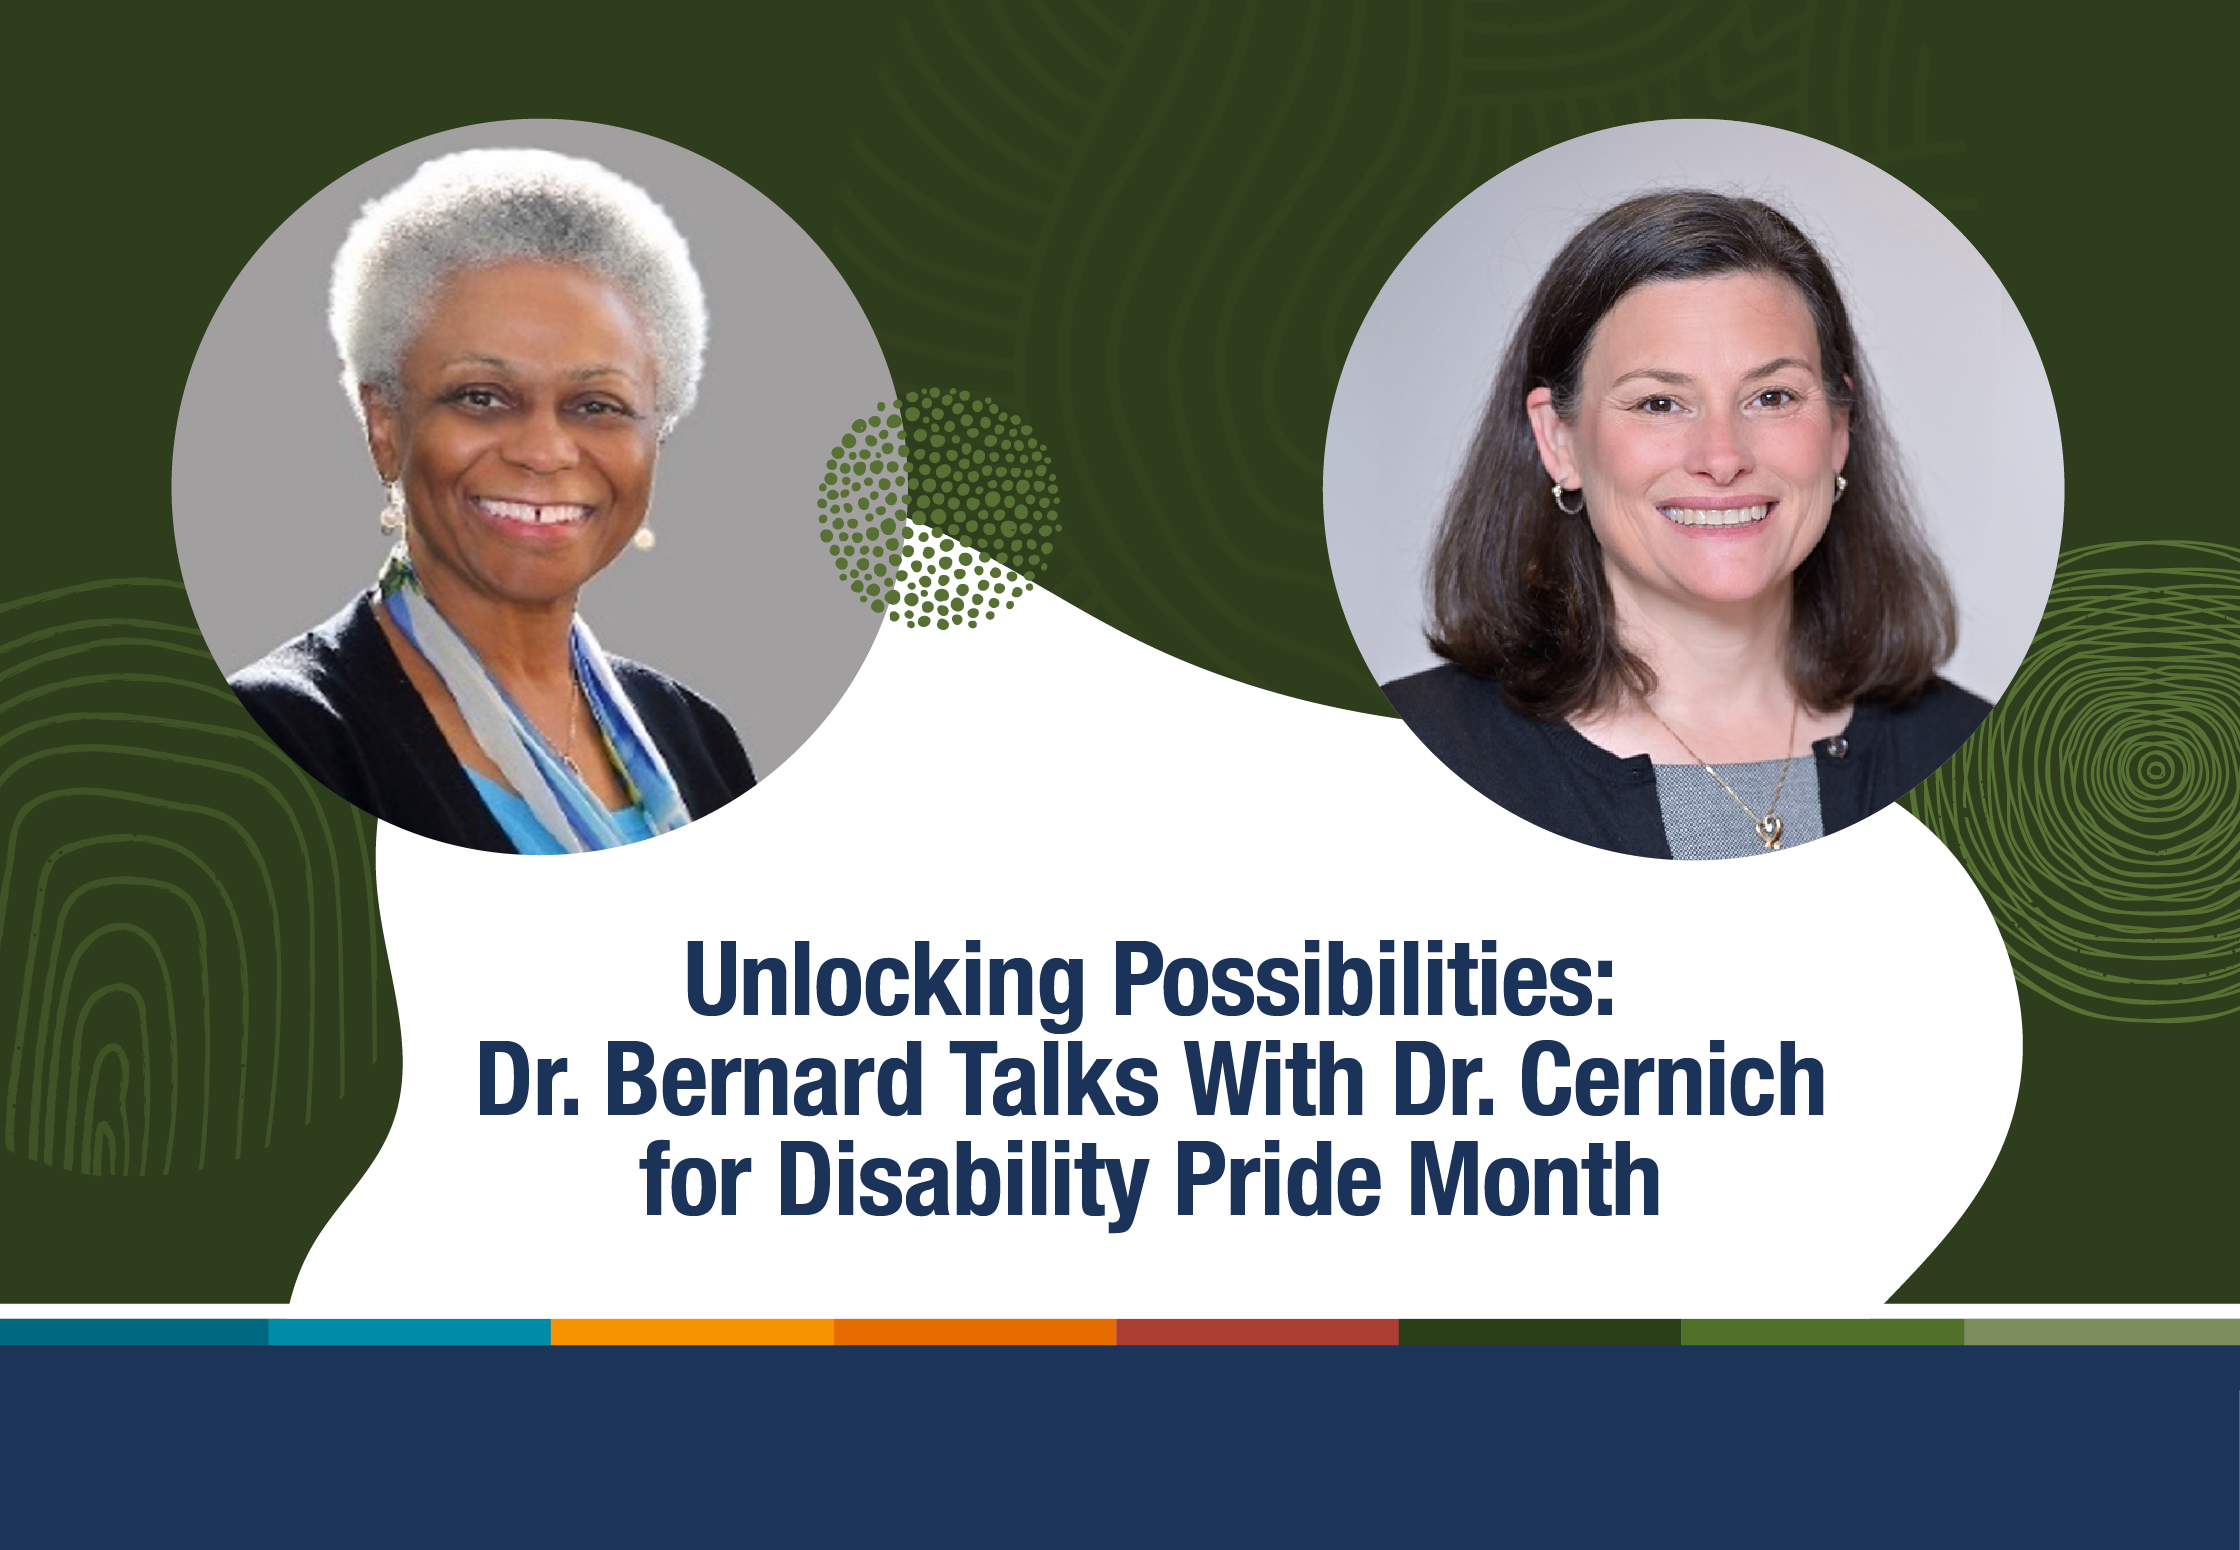 Unlocking Possibilities: Dr. Bernard Talks With Dr. Cernich for Disability Pride Month. Photos of Dr. Bernard and Dr. Cernich. Logo of the National Institutes of Health, Office of the Director, Chief Officer for Scientific Workforce Diversity. Learn more at diversity.nih.gov.